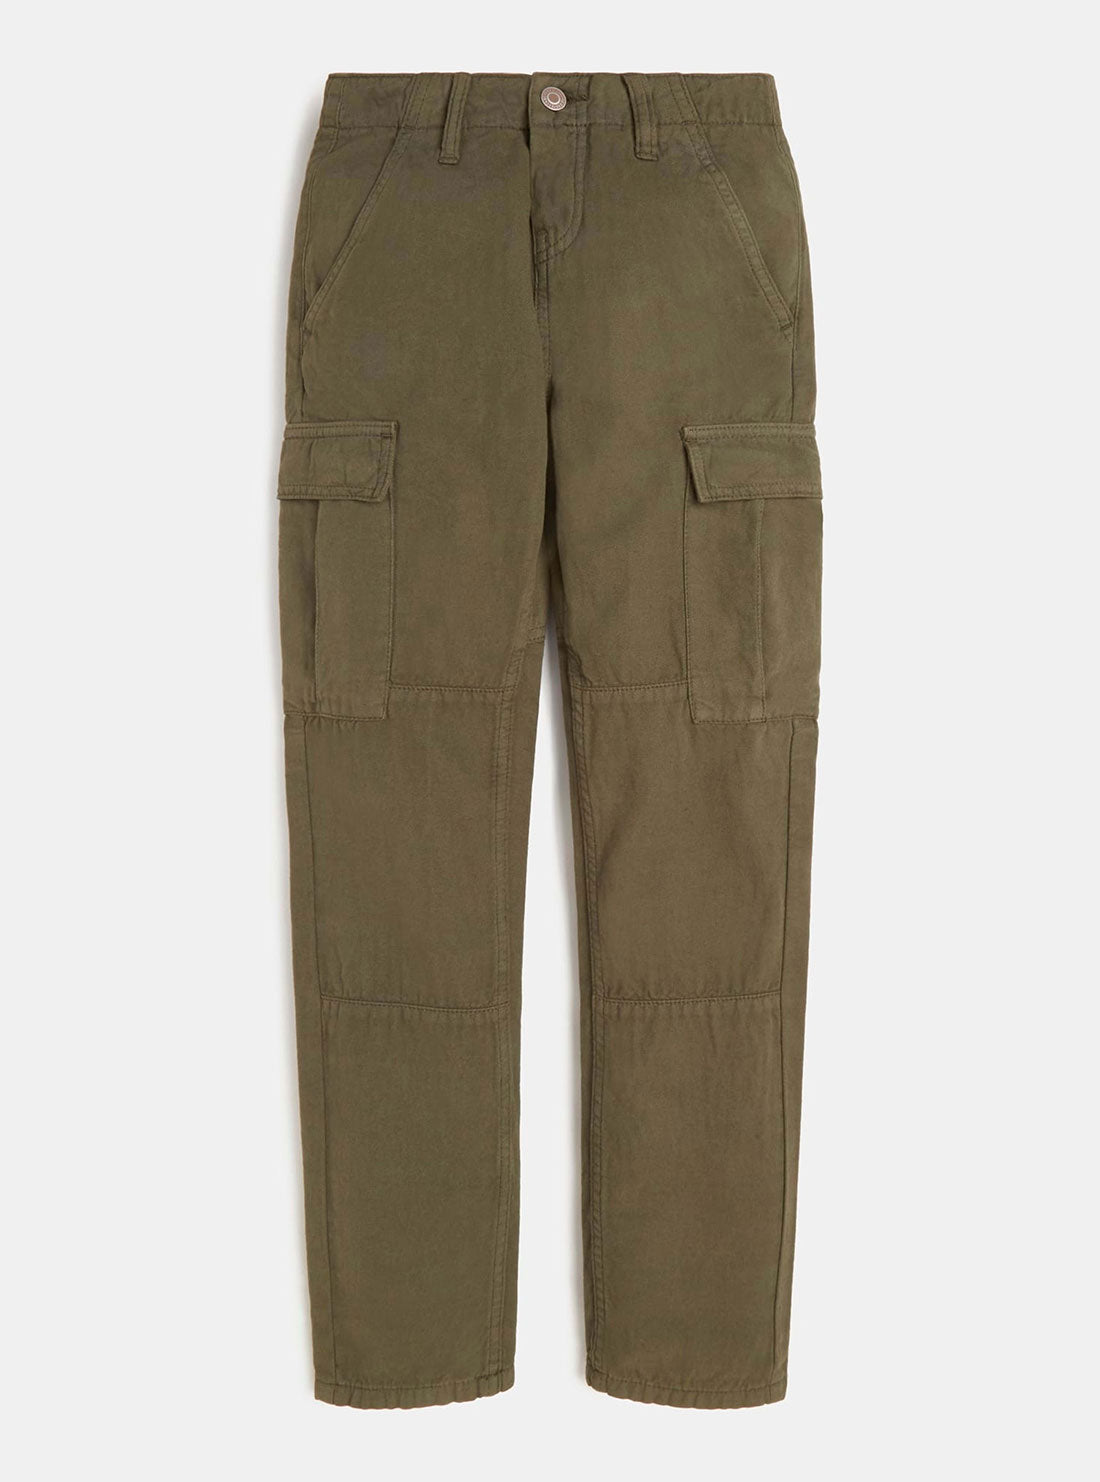 GUESS Big Boy Olive Cargo Pants (7-16) L2GB02WEI63 Front View